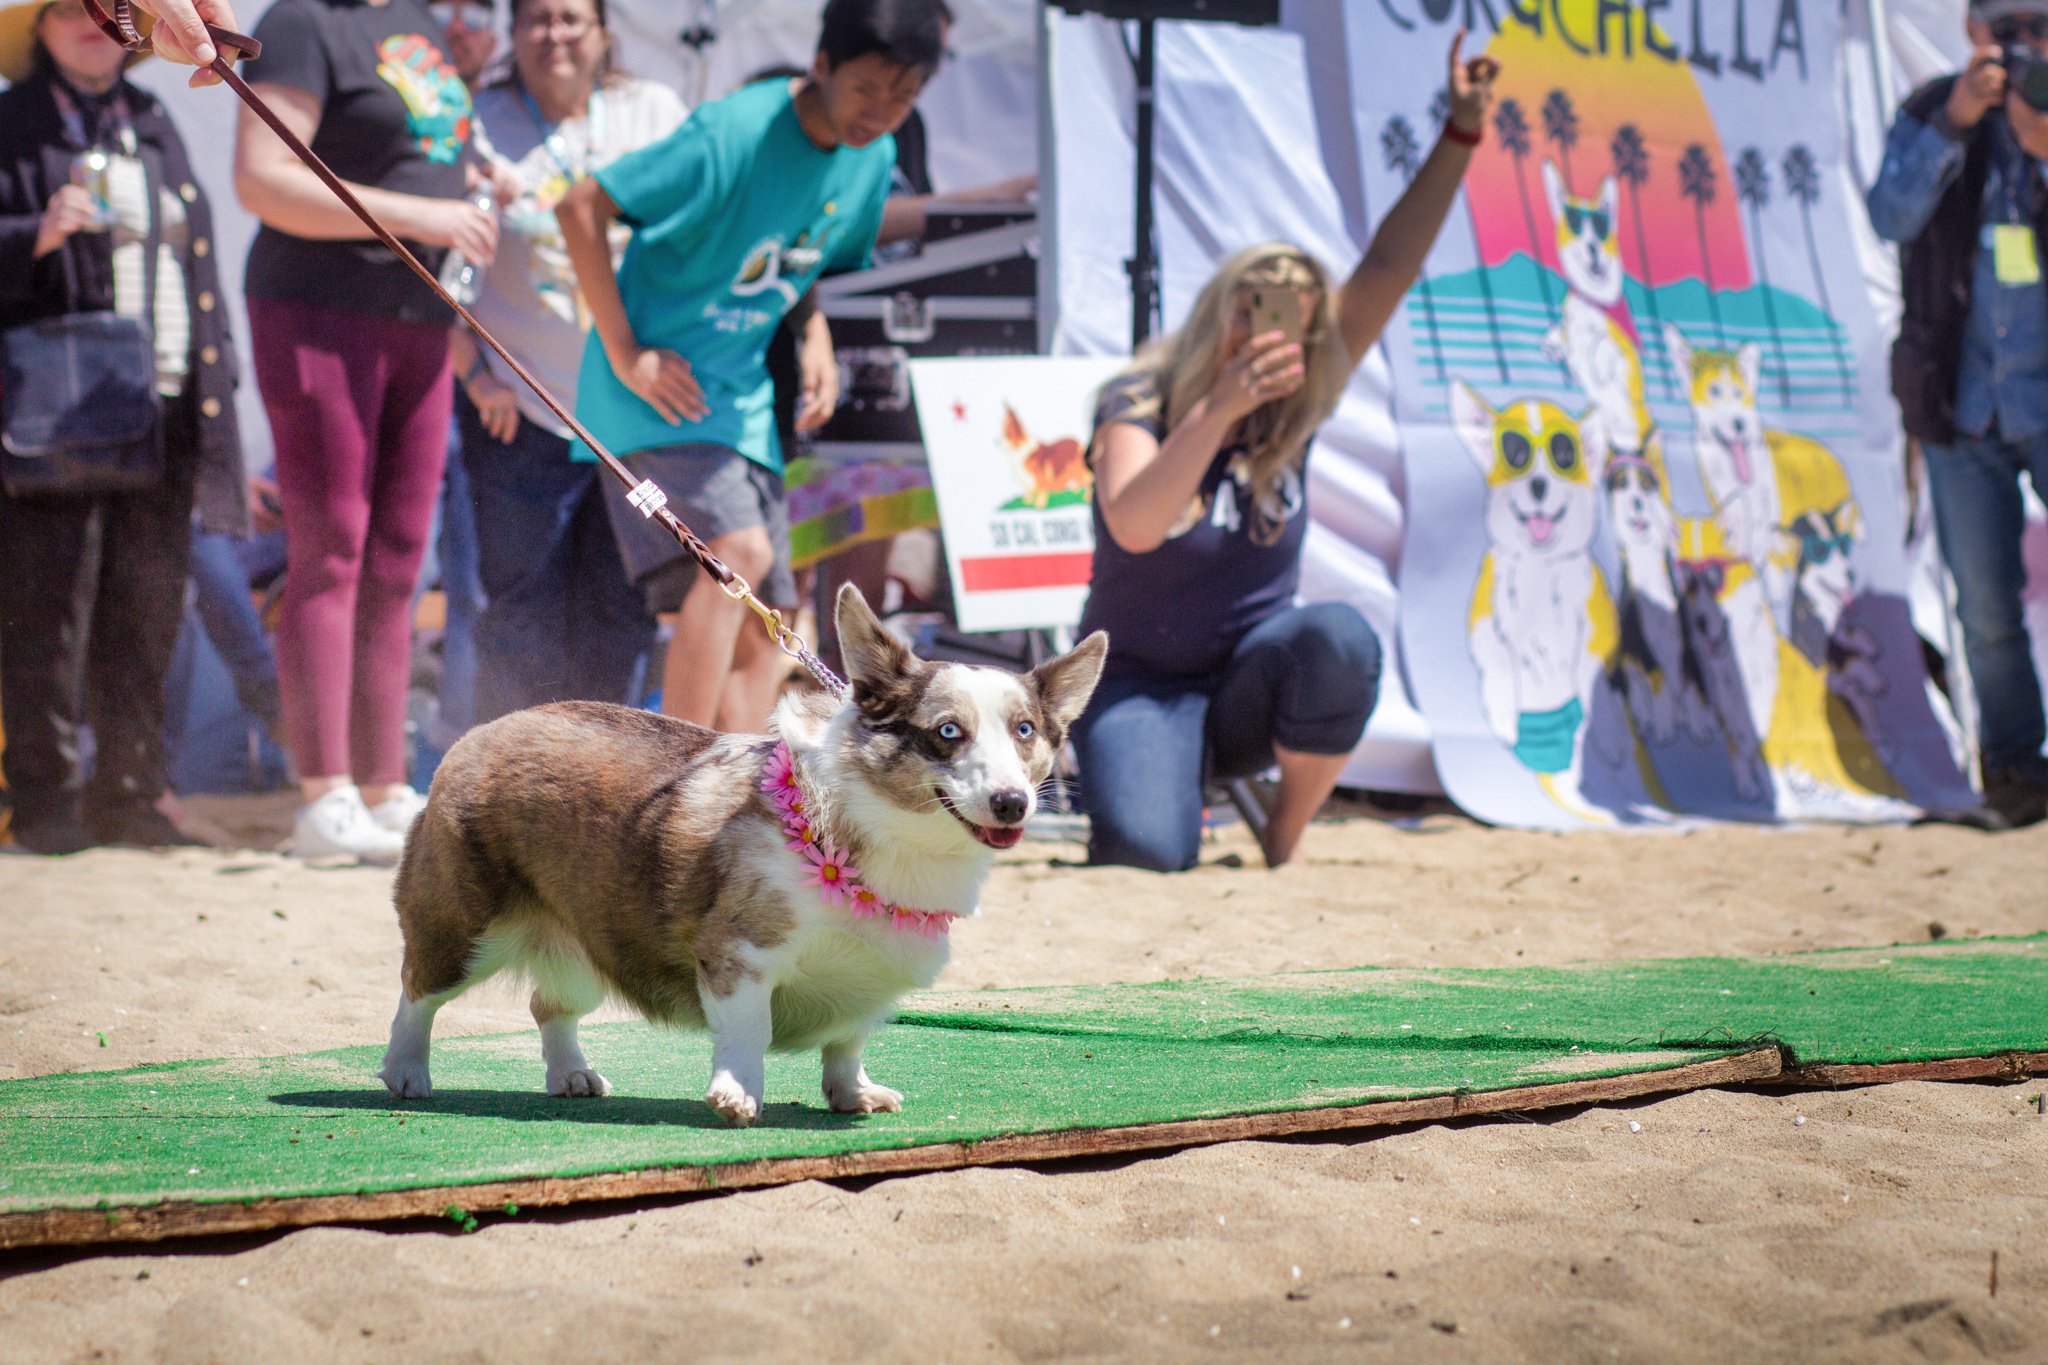 Orange County Pet and Dog Photography - by Steamer Lee - Corgi Beach Day Spring 2019 - Southern Caliornia 20.JPG